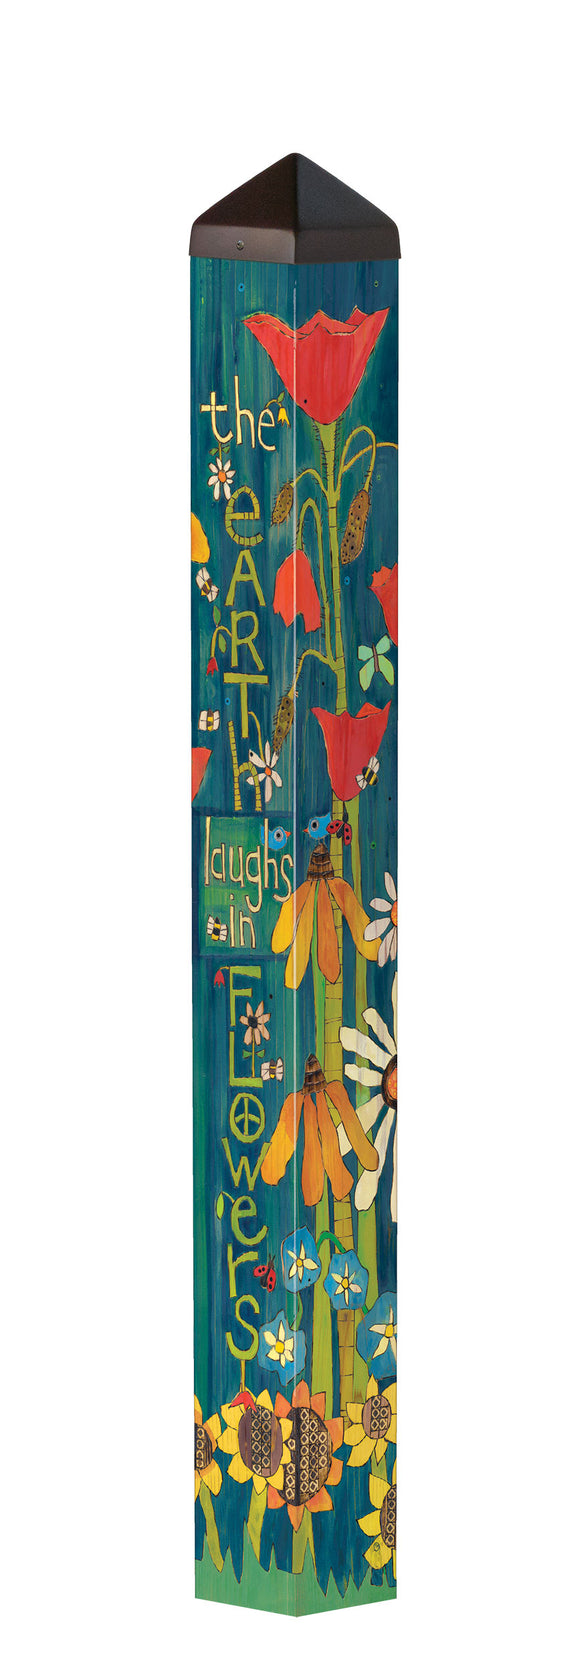 Art Pole From Studio M  - Earth Laughs in Flowers 40